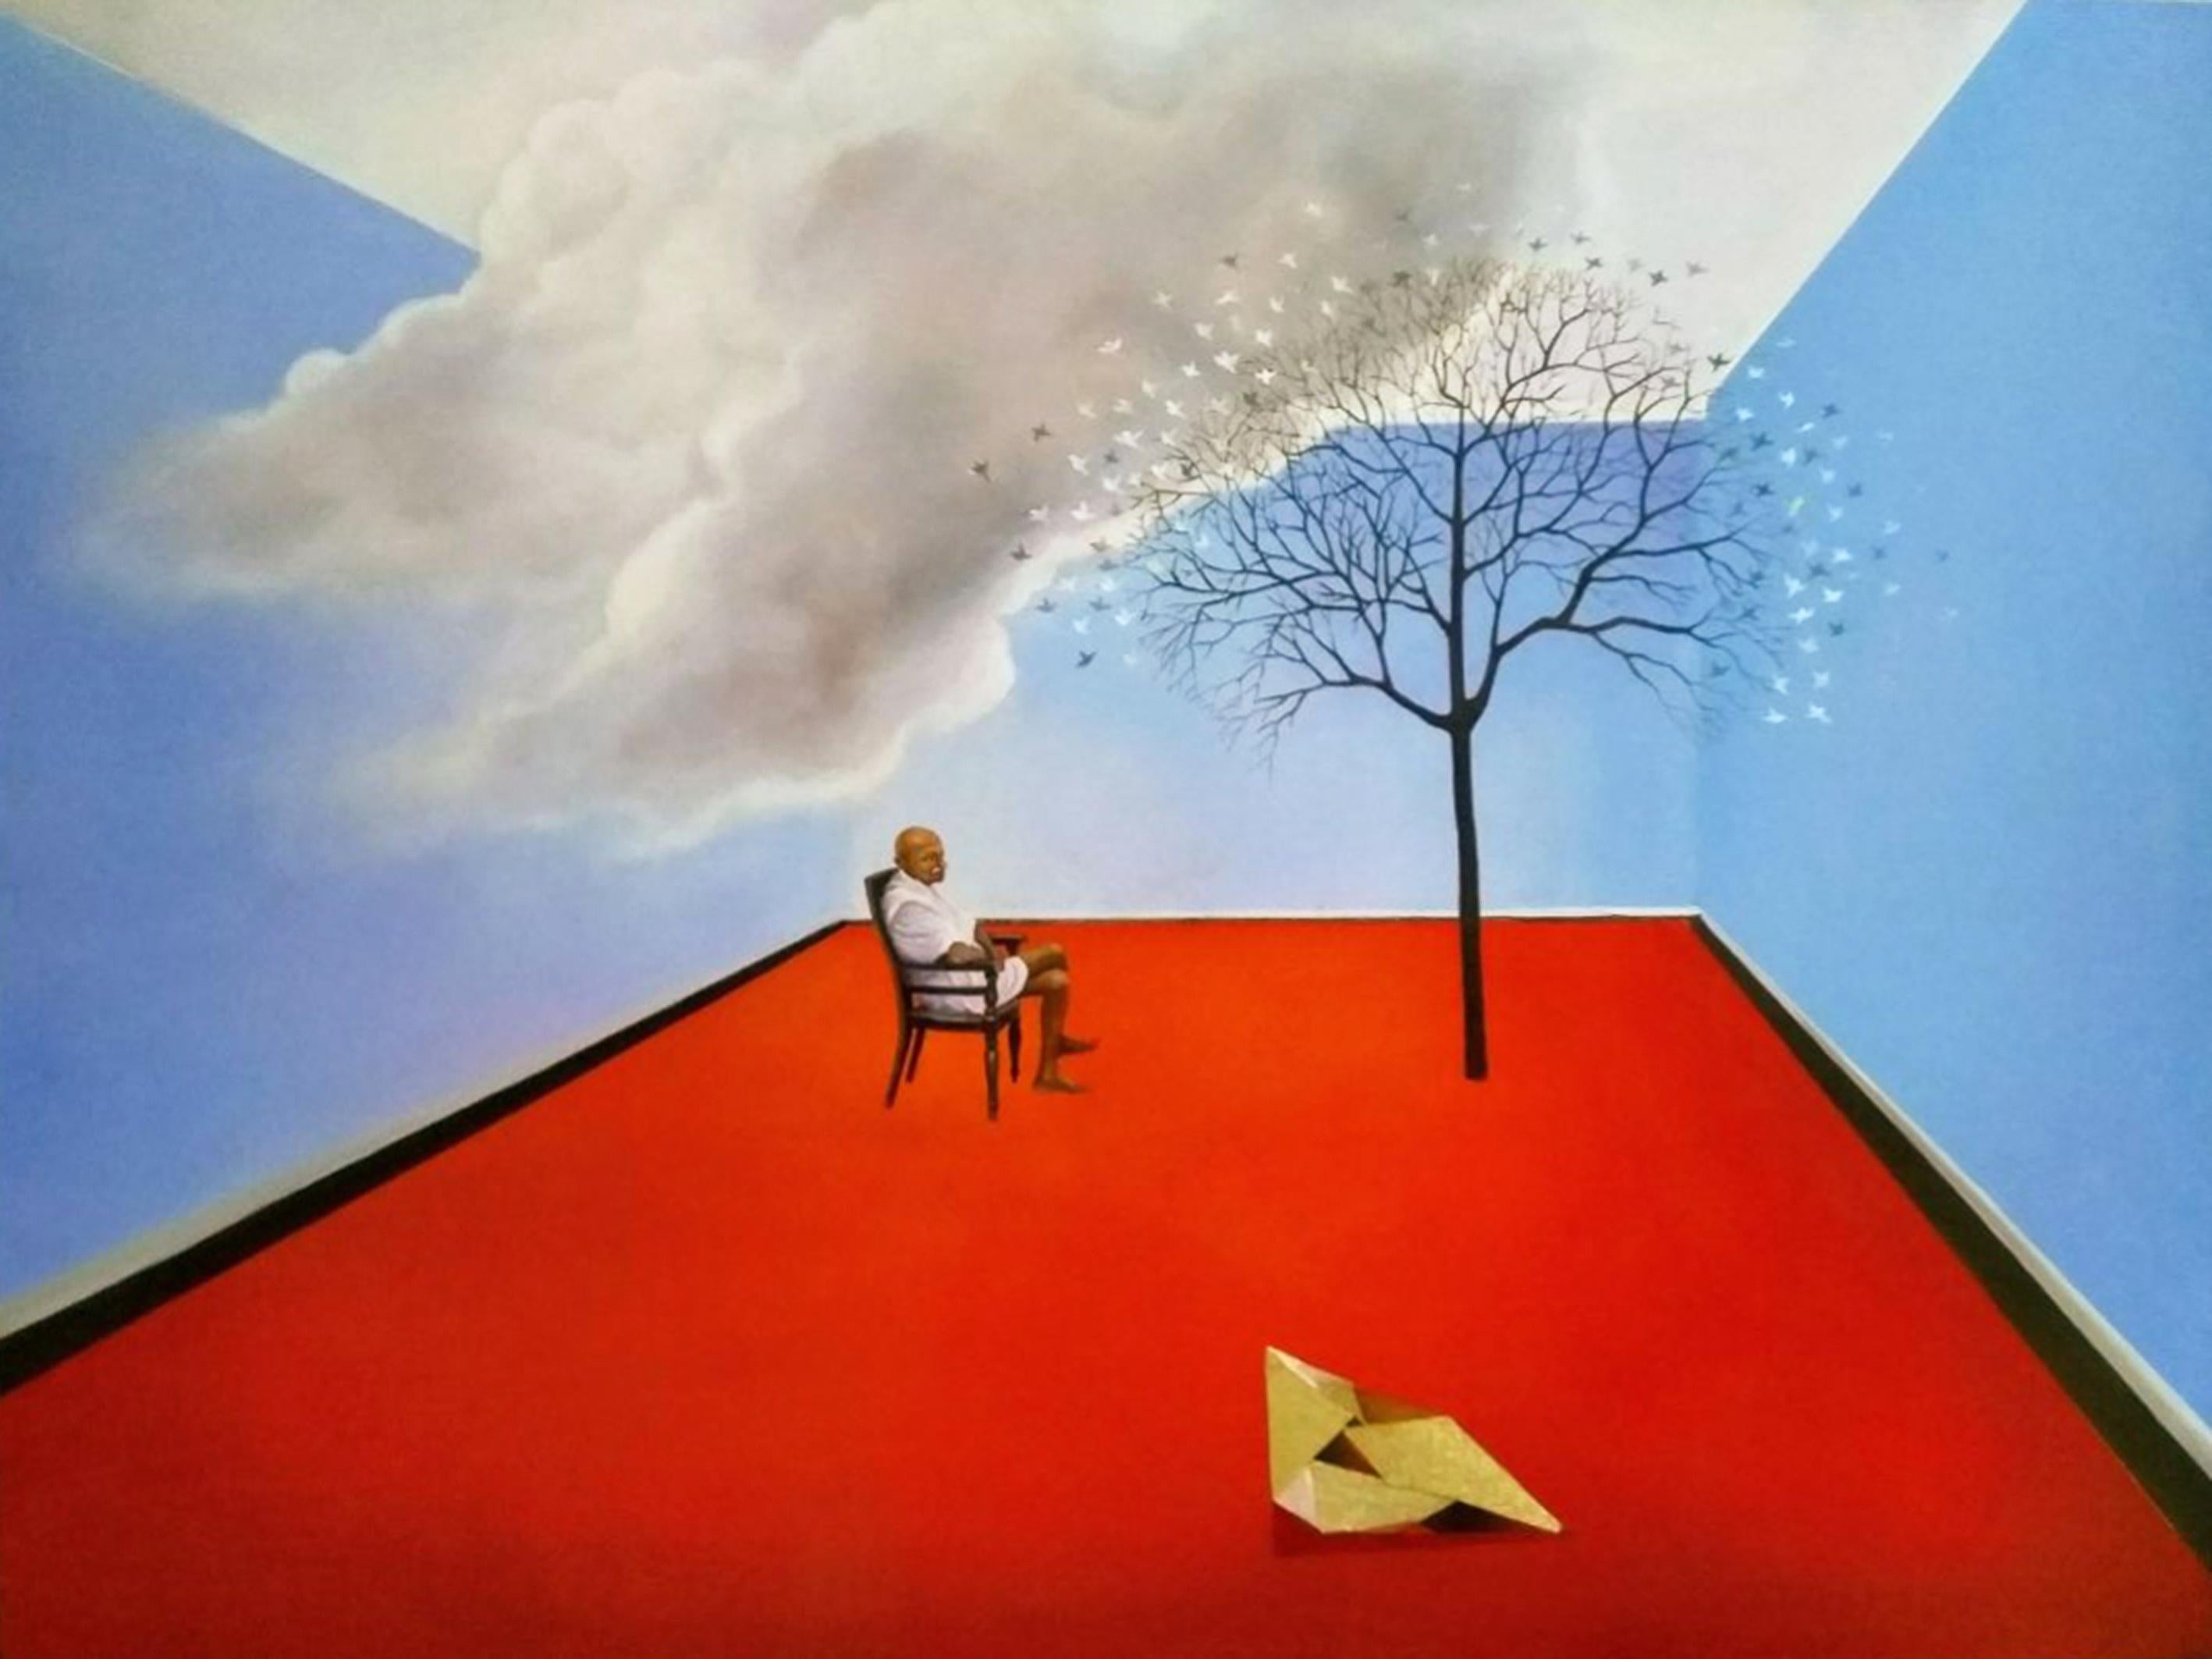 Sudhanshu Sutar Interior Painting - Man Seated, Acrylic on Canvas, Red, Blue by Indian Artist "In Stock"